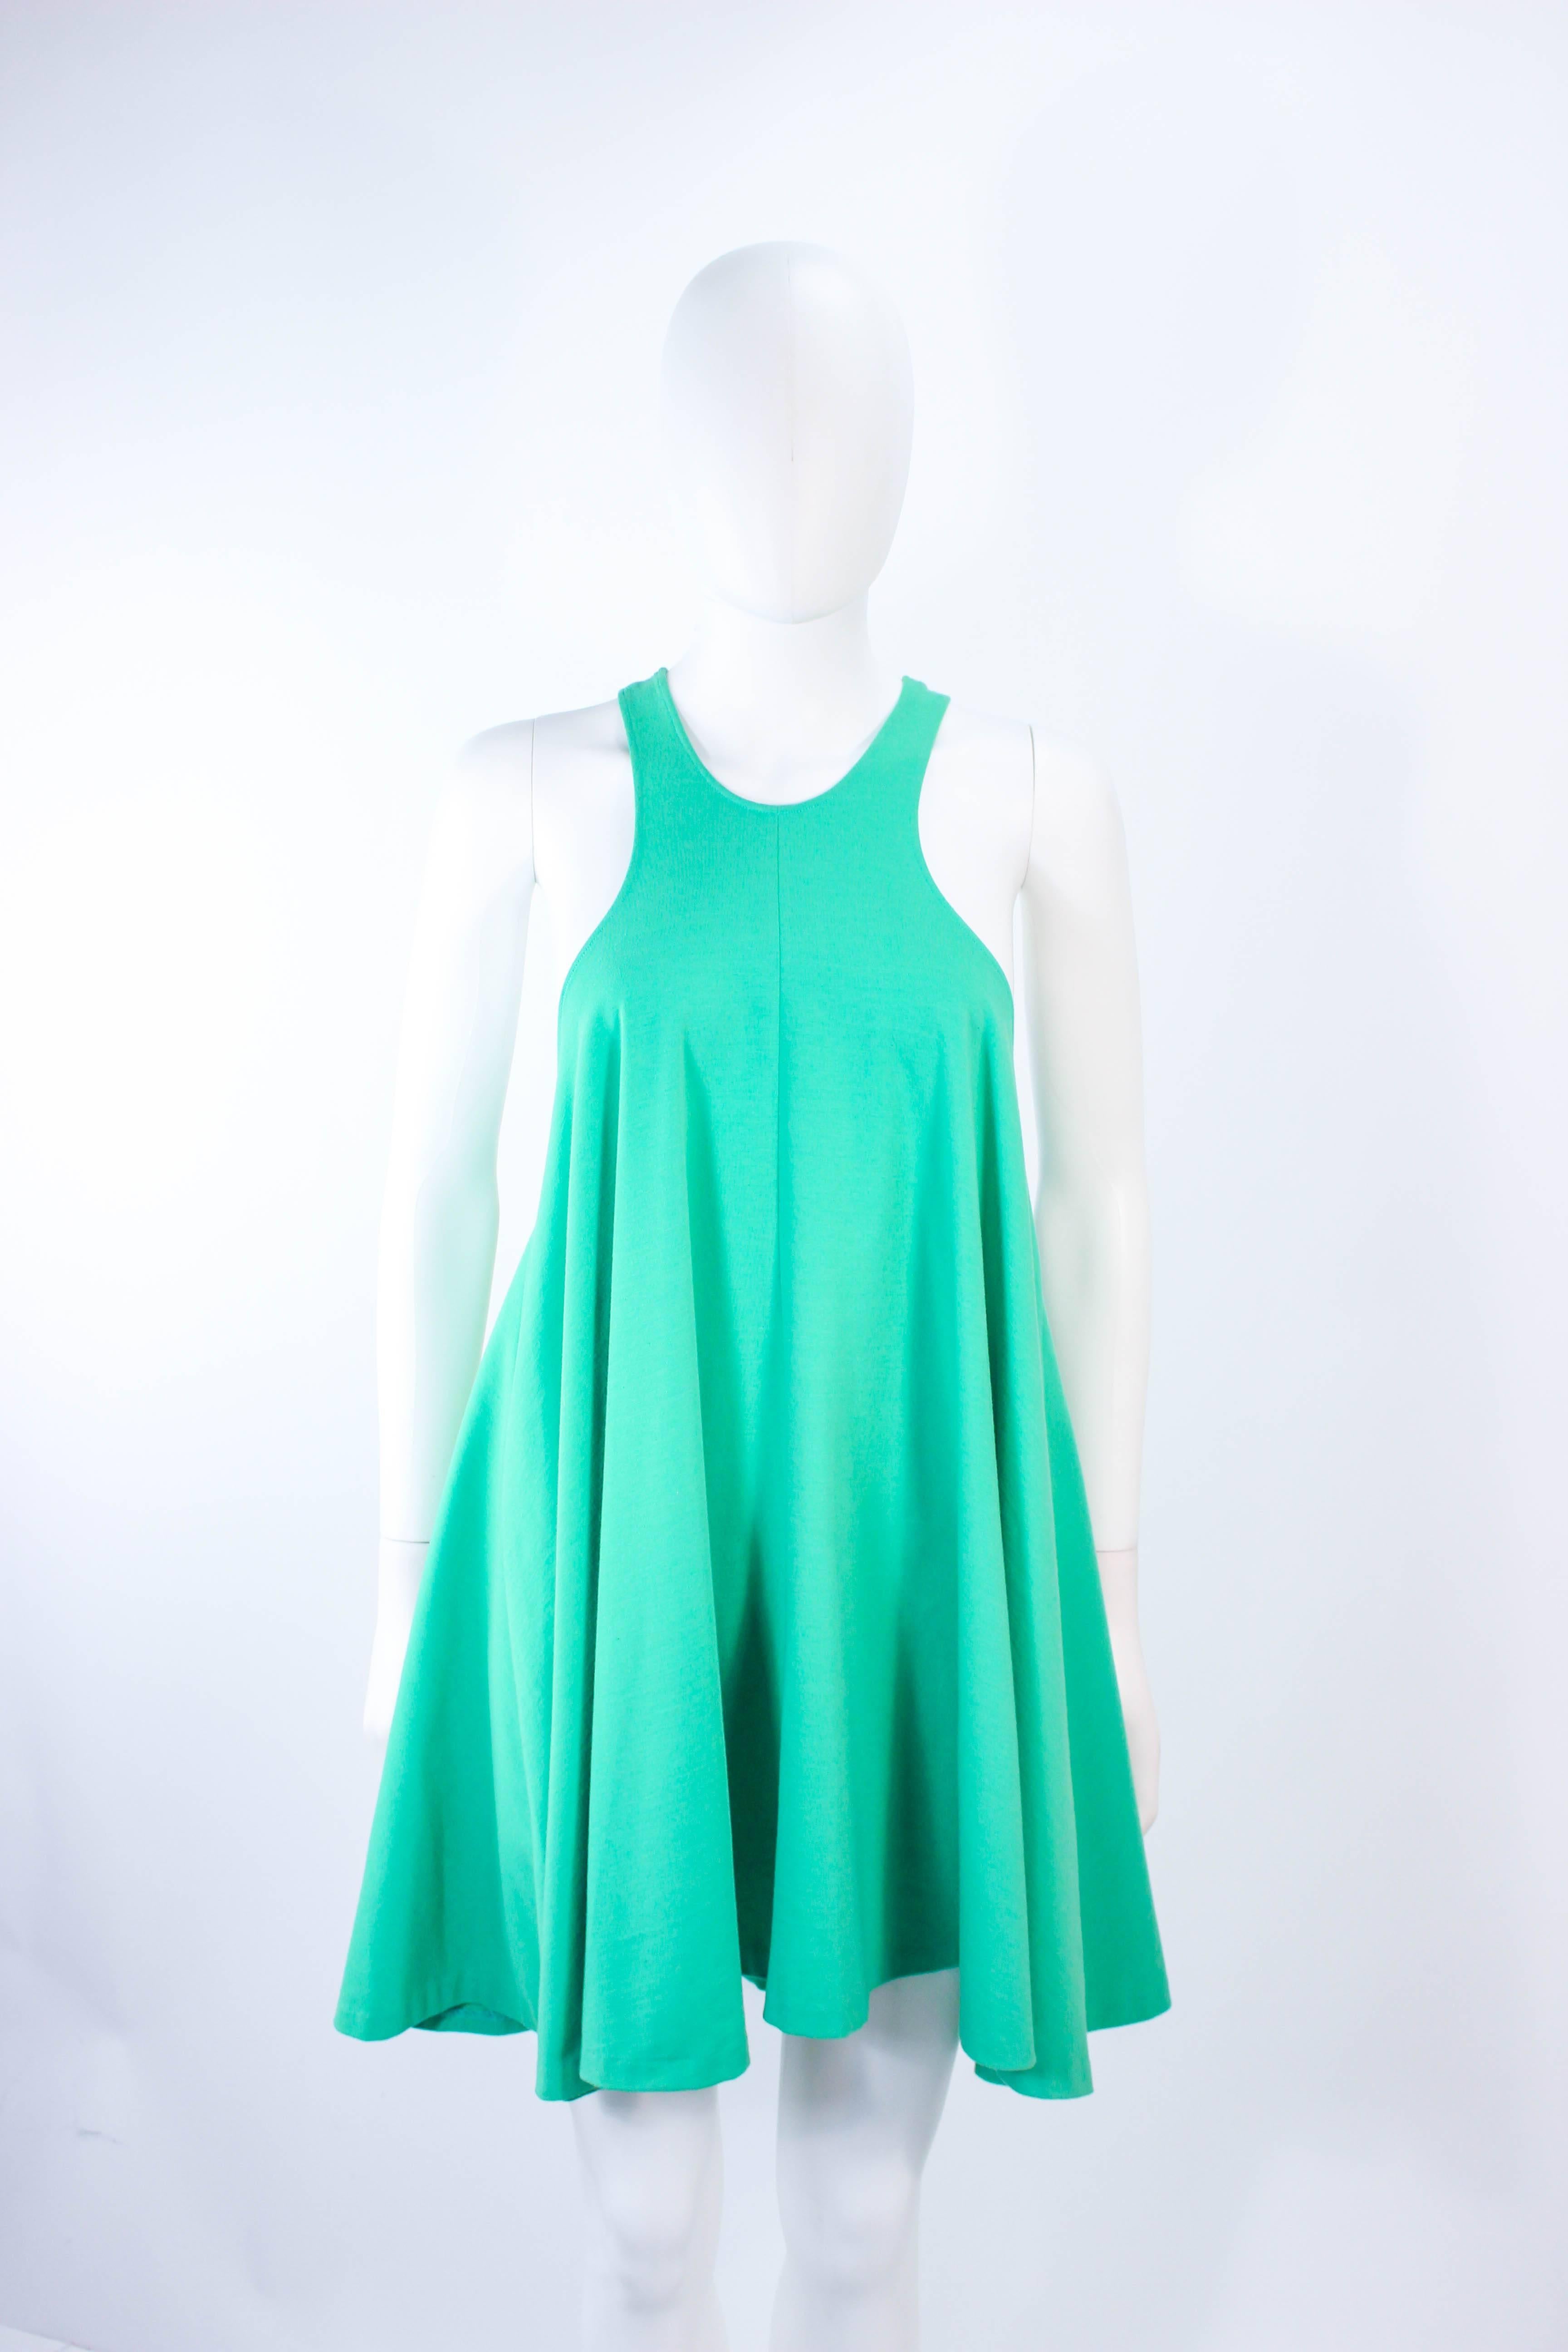 NORMA KAMALI OMO Mint Green Stretch Knit Trapeze Dress and Crop Pants Size M P For Sale 1